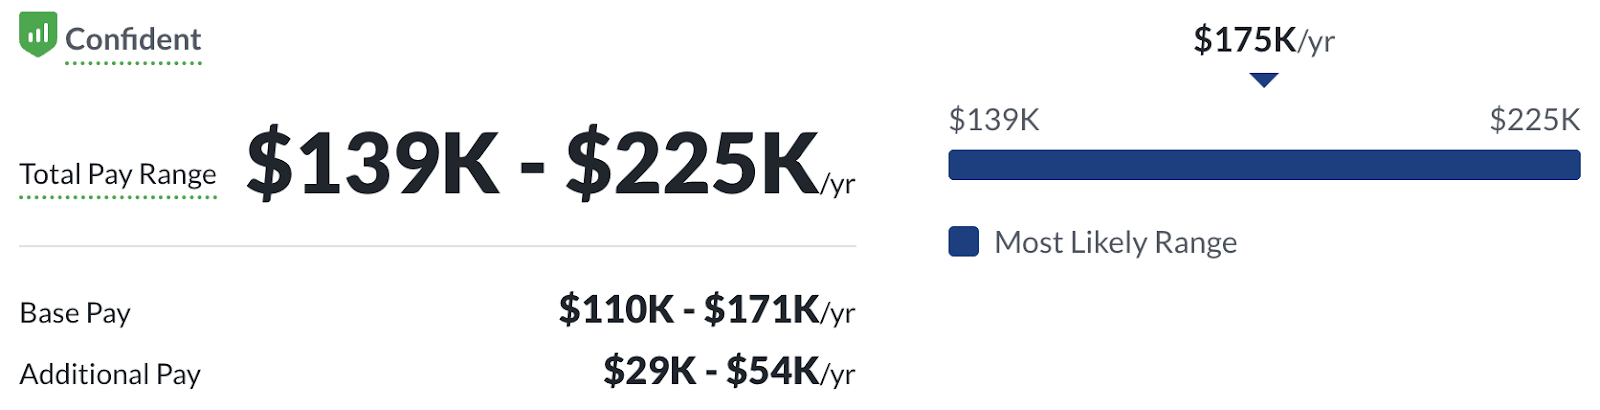 Cloud Architect Salary in the US